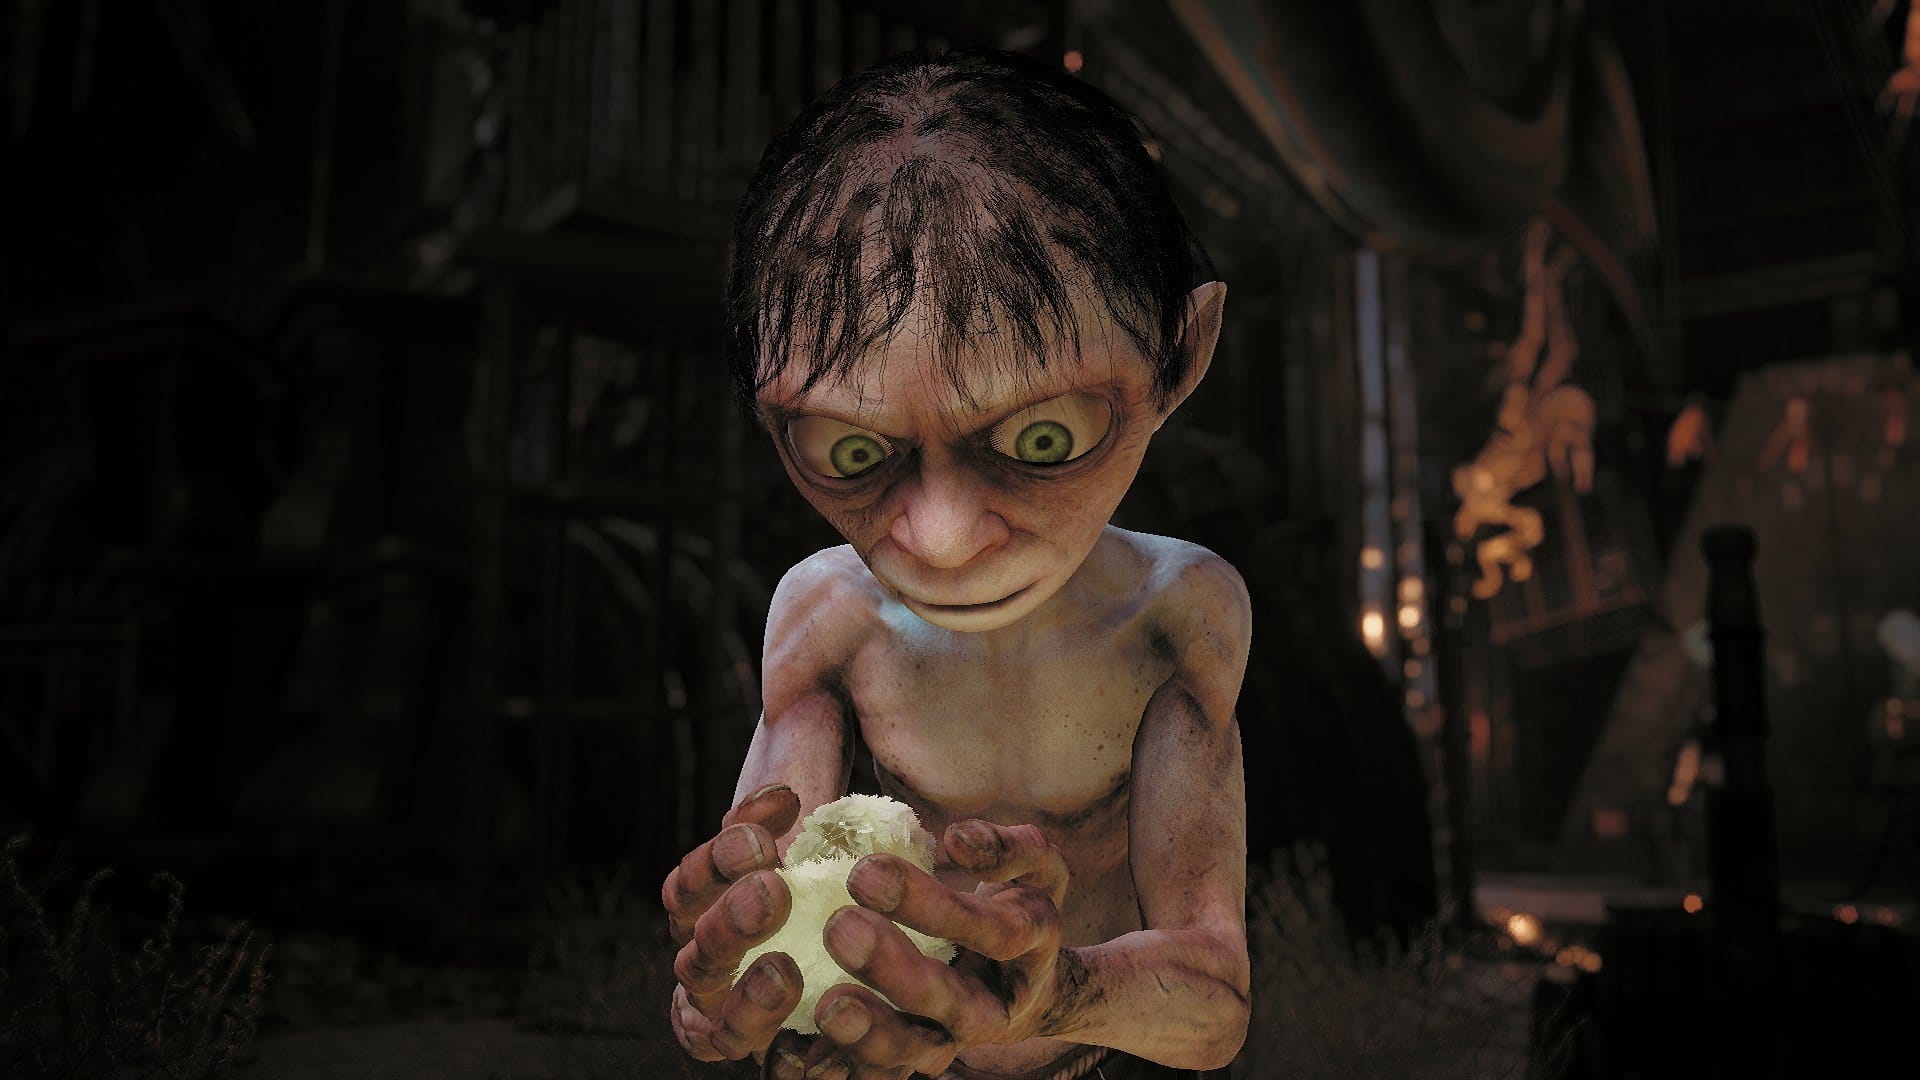 LOTR: Gollum developer apologizes after game is universally panned